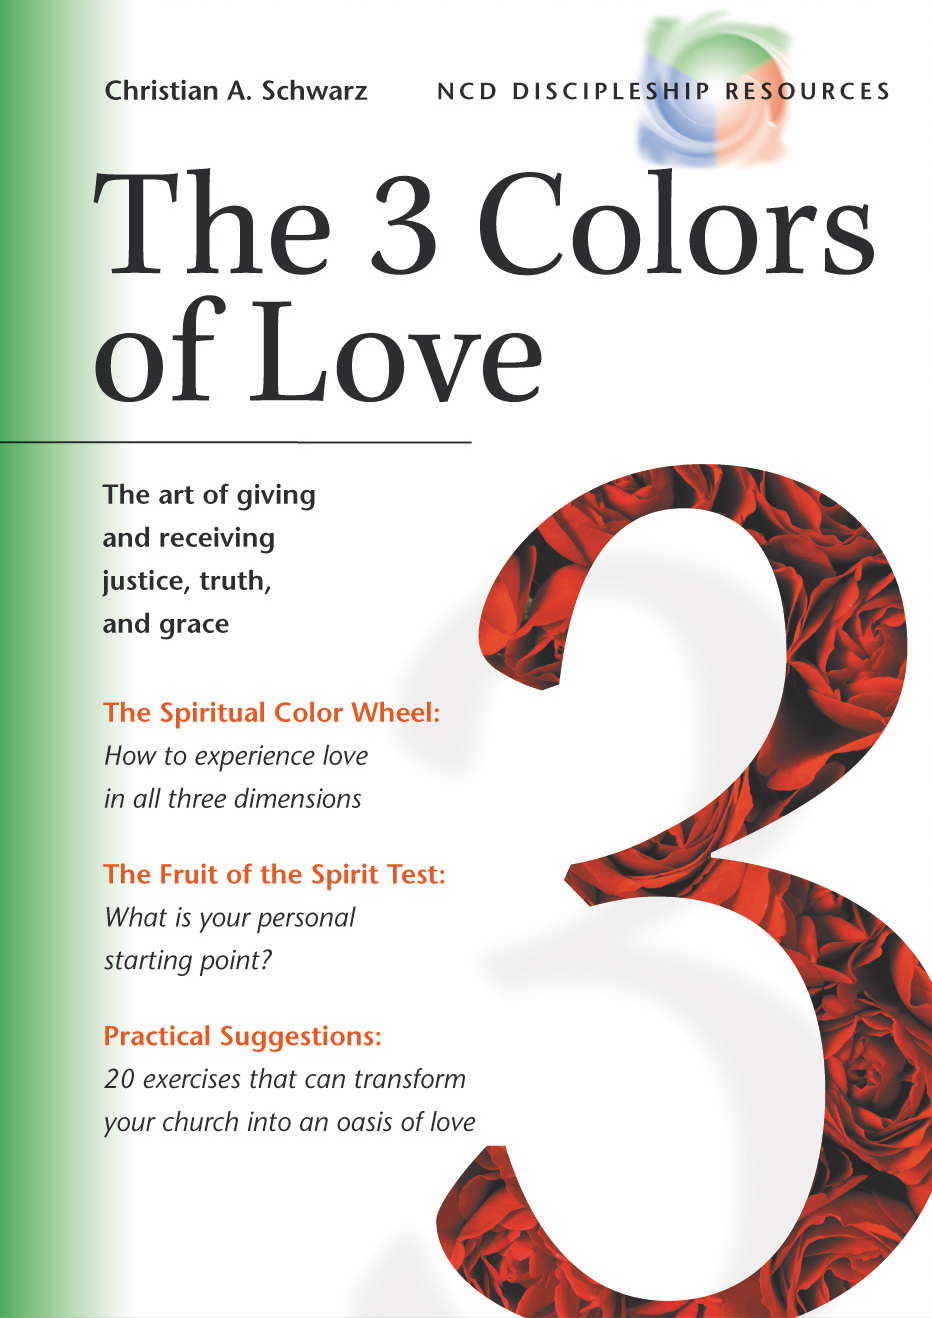 The 3 Colors of Love